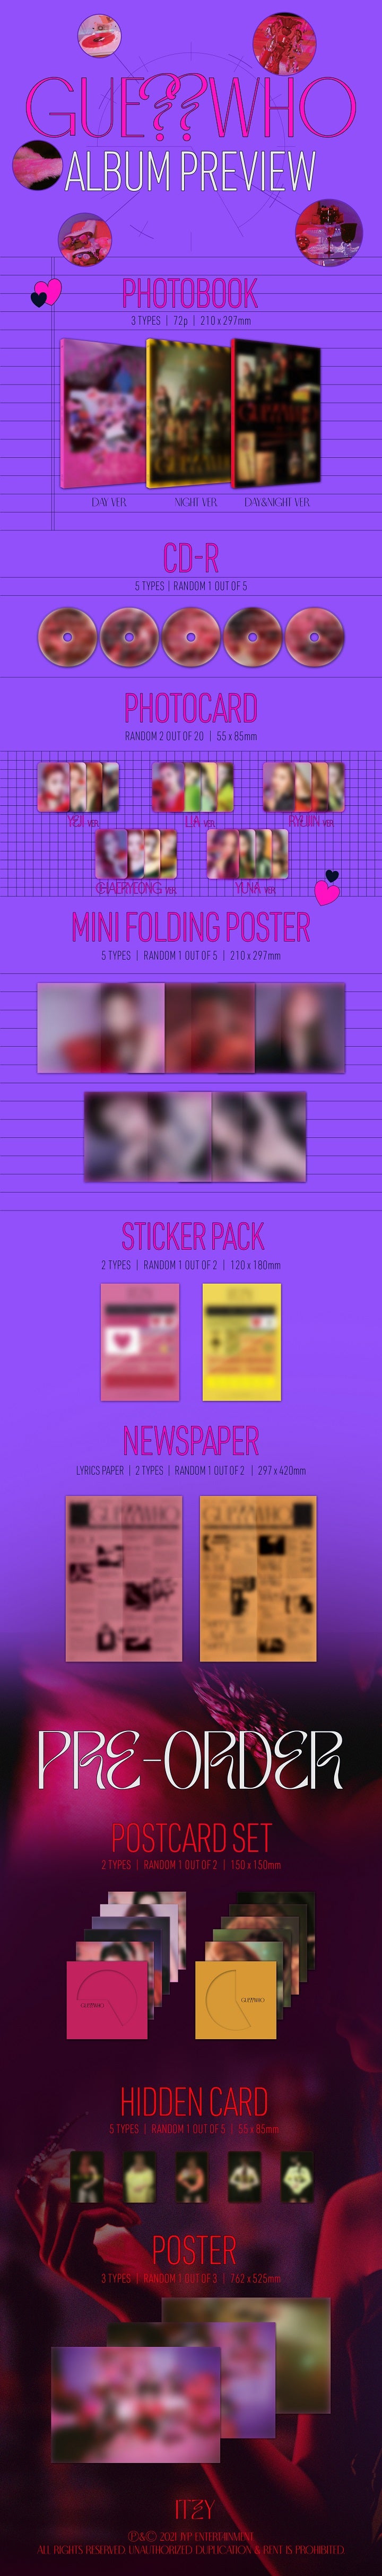 1 CD
1 Photo Book (72 pages)
2 Photo Card (random out of 20 types)
1 Mini Folding Poster (random out of 5 types)
1 Sticker...